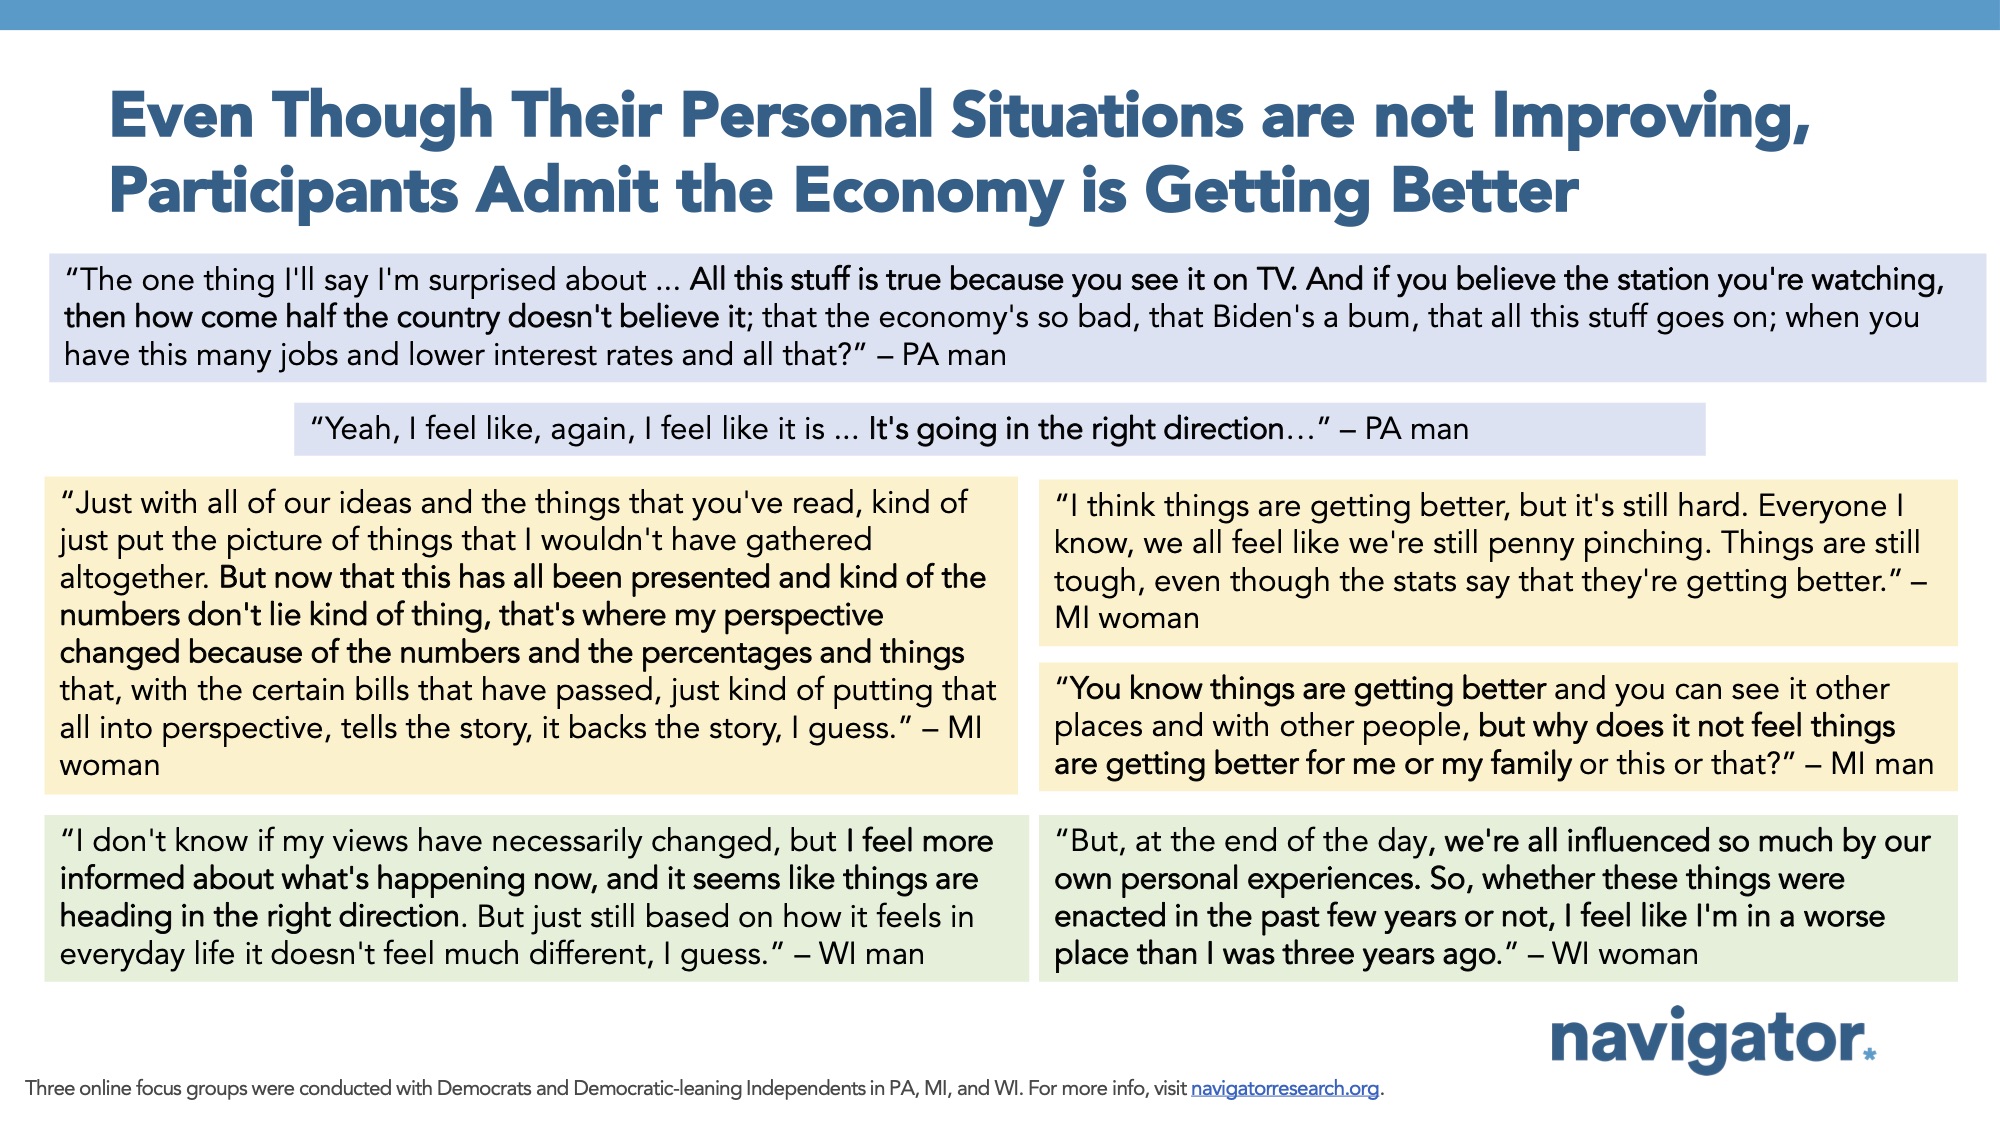 Focus group report slide titled: Even Though Their Personal Situations are not Improving, Participants Admit the Economy is Getting Better